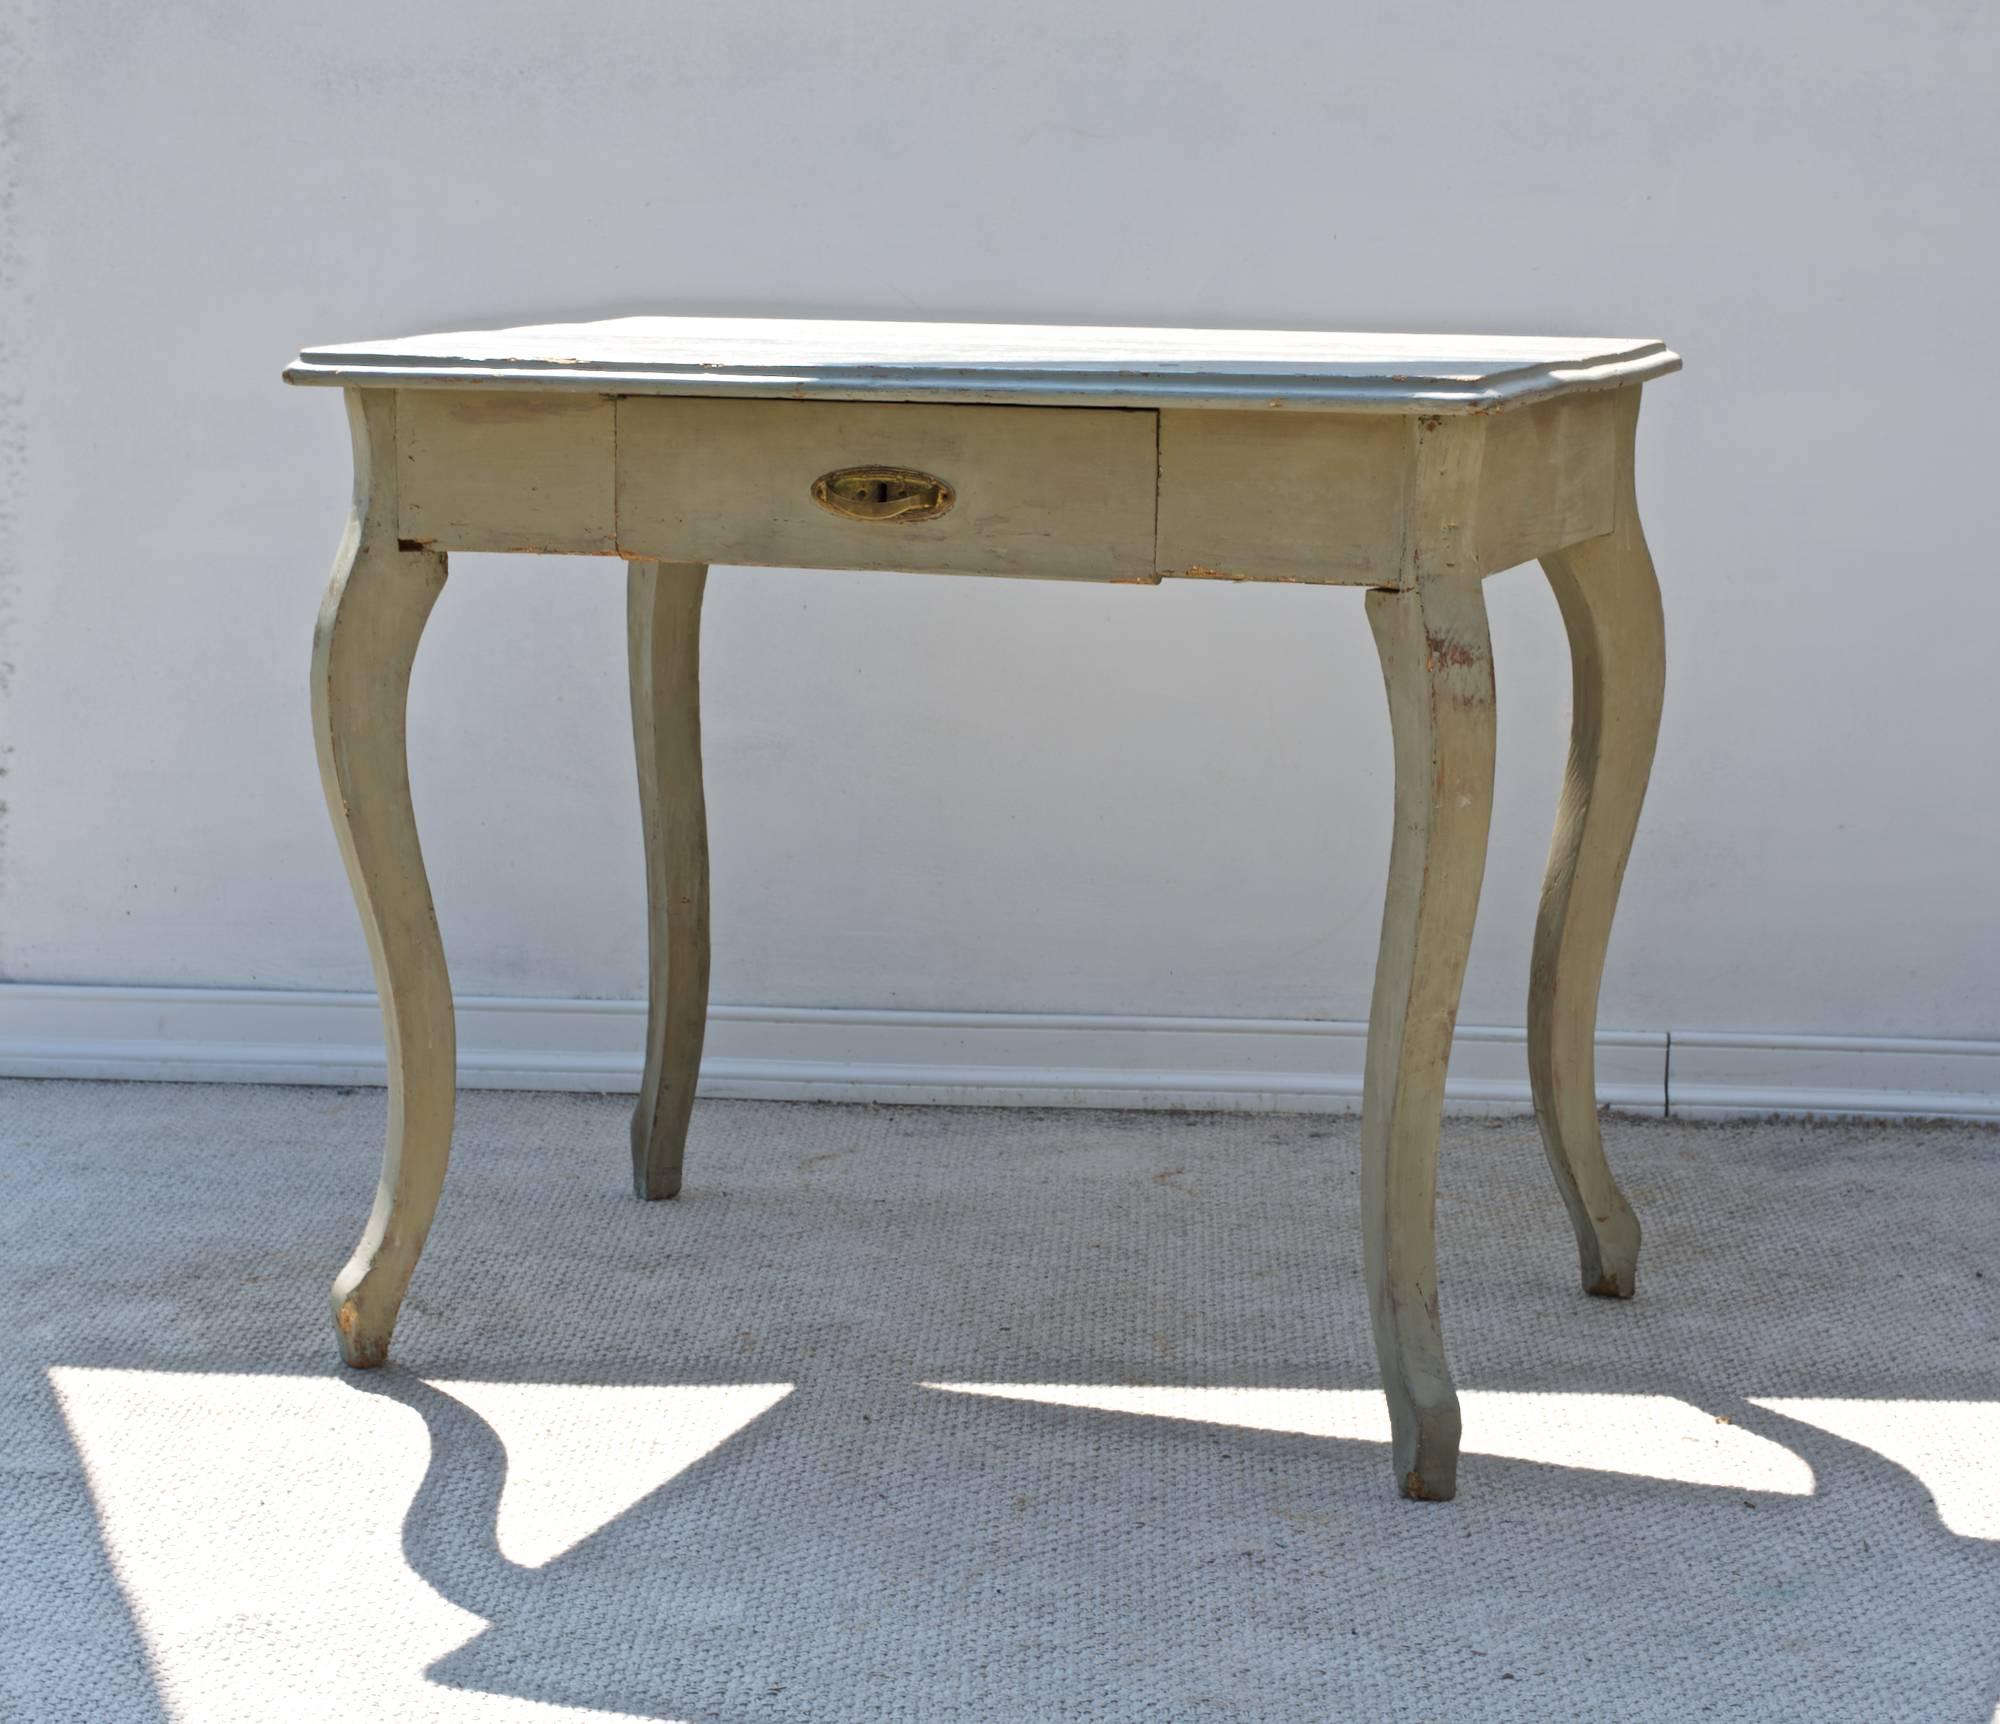 A sweet and curvaceous late 19th century French writing table having an old and fantastic Gustavian inspired paint surface, a three board molded top resting on one short and central drawer that resides above carved and flowing cabriole' legs. The